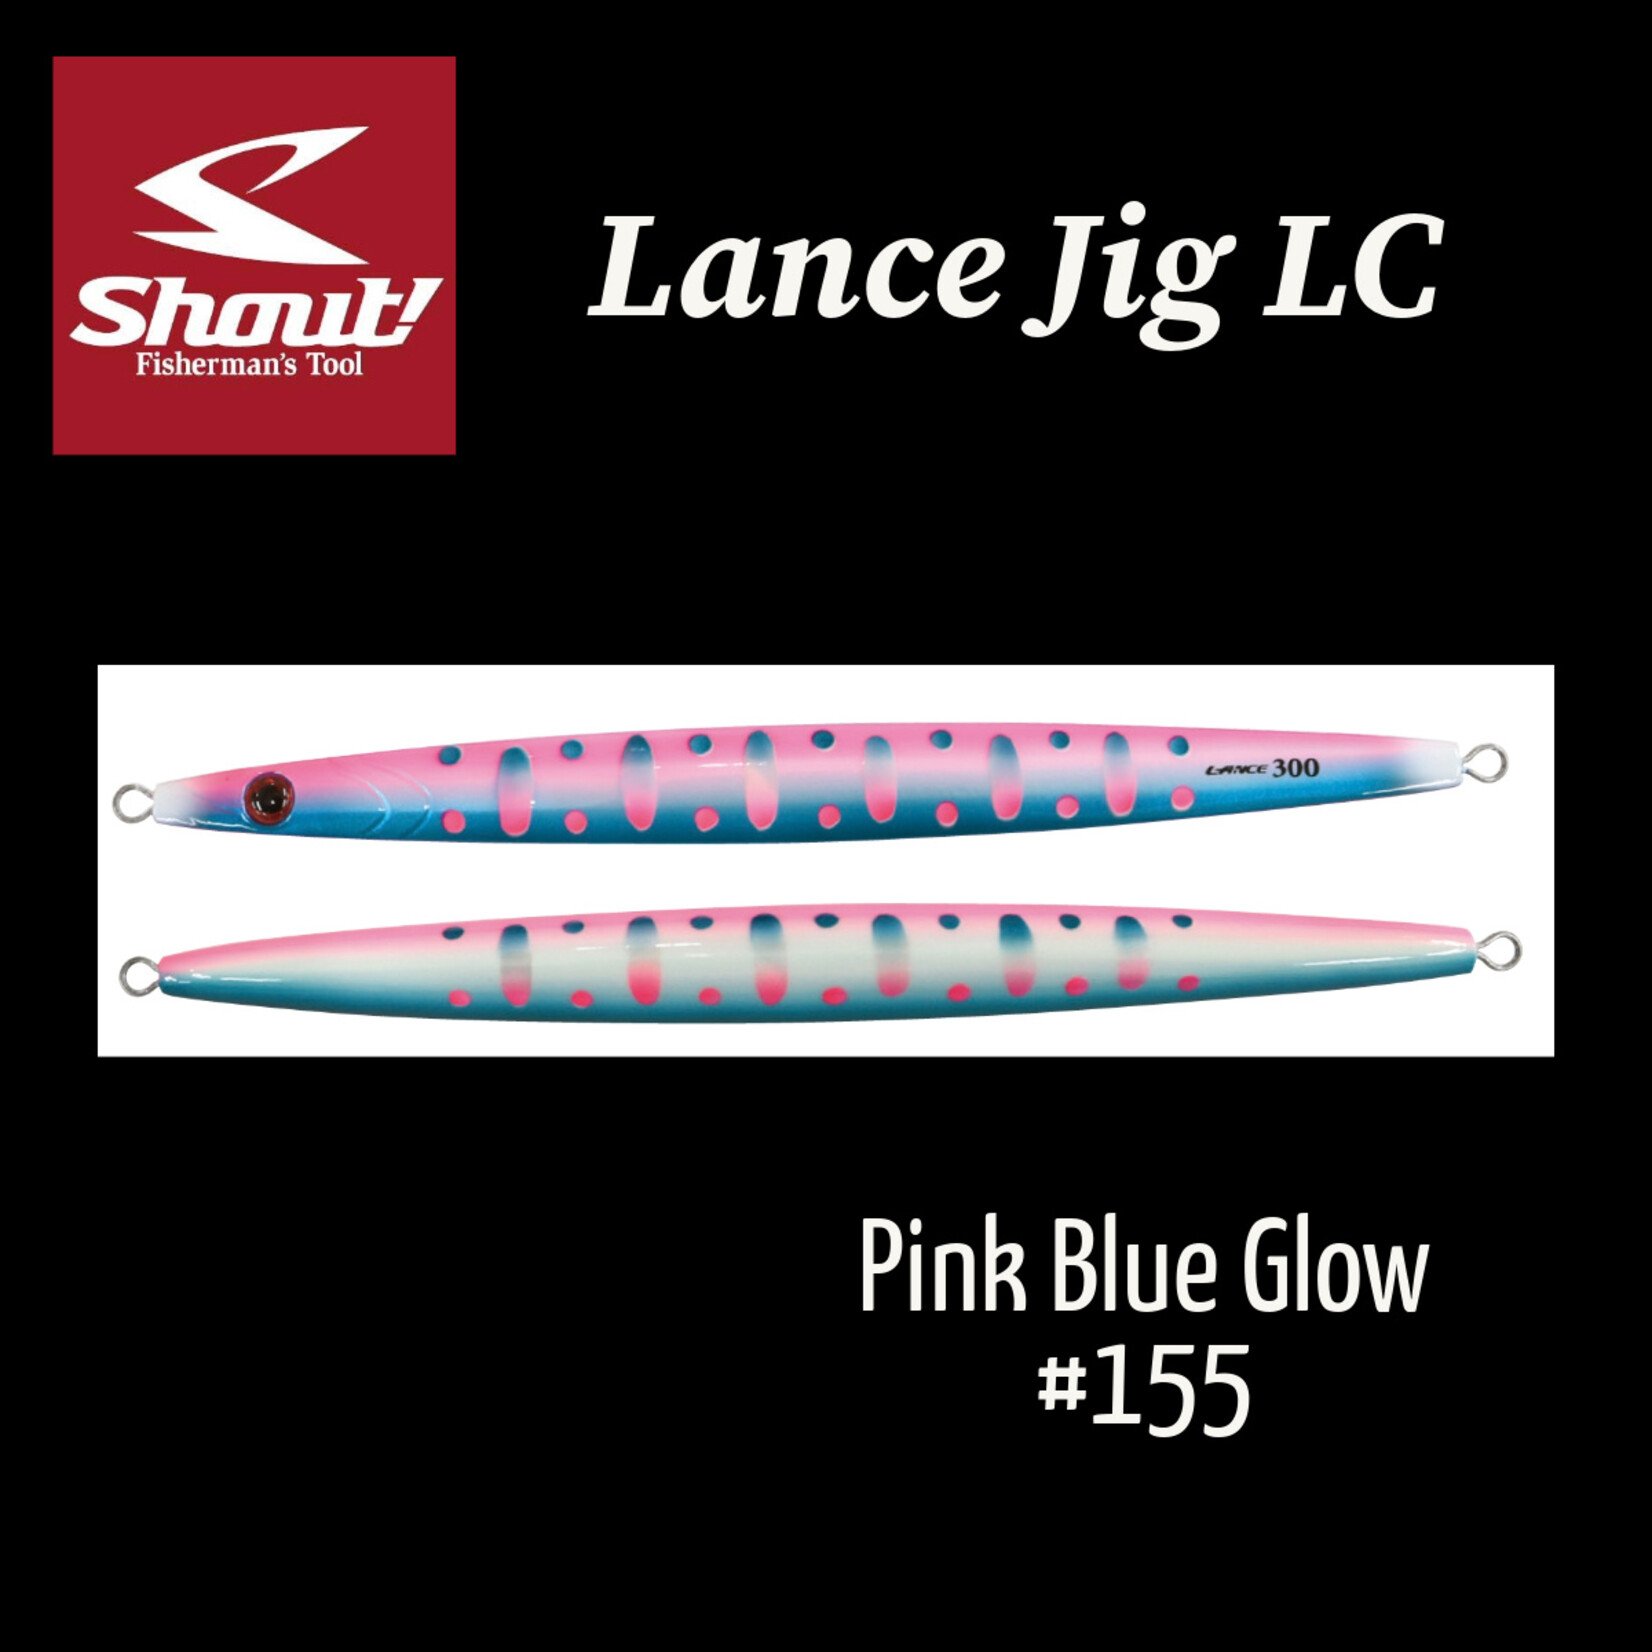 Shout! Lance Jig LC